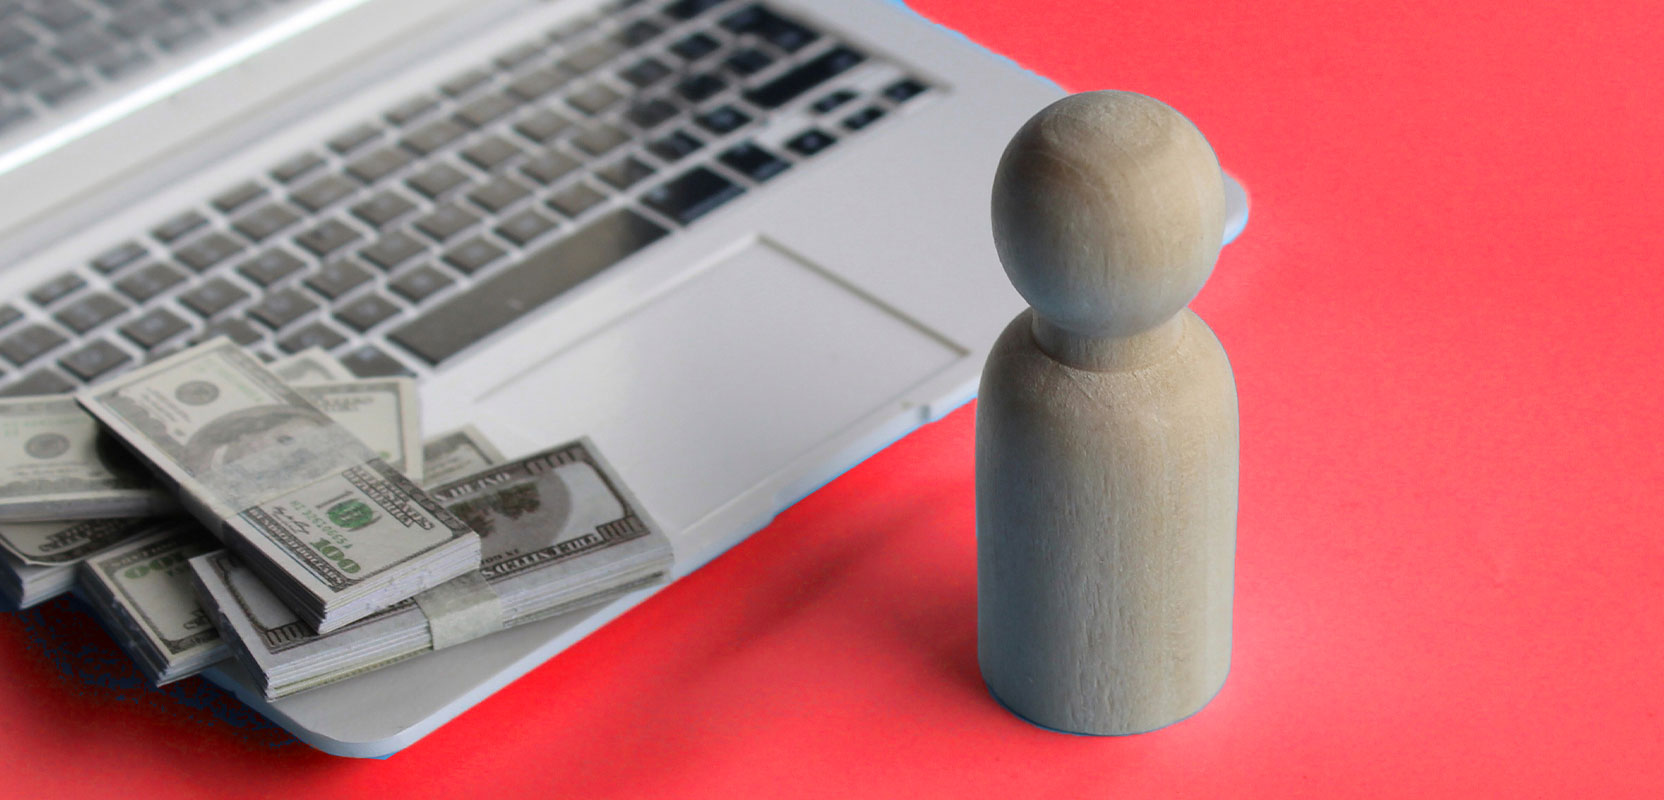 Carved wooden object standing in front of a laptop with a pile of money on the keyboard